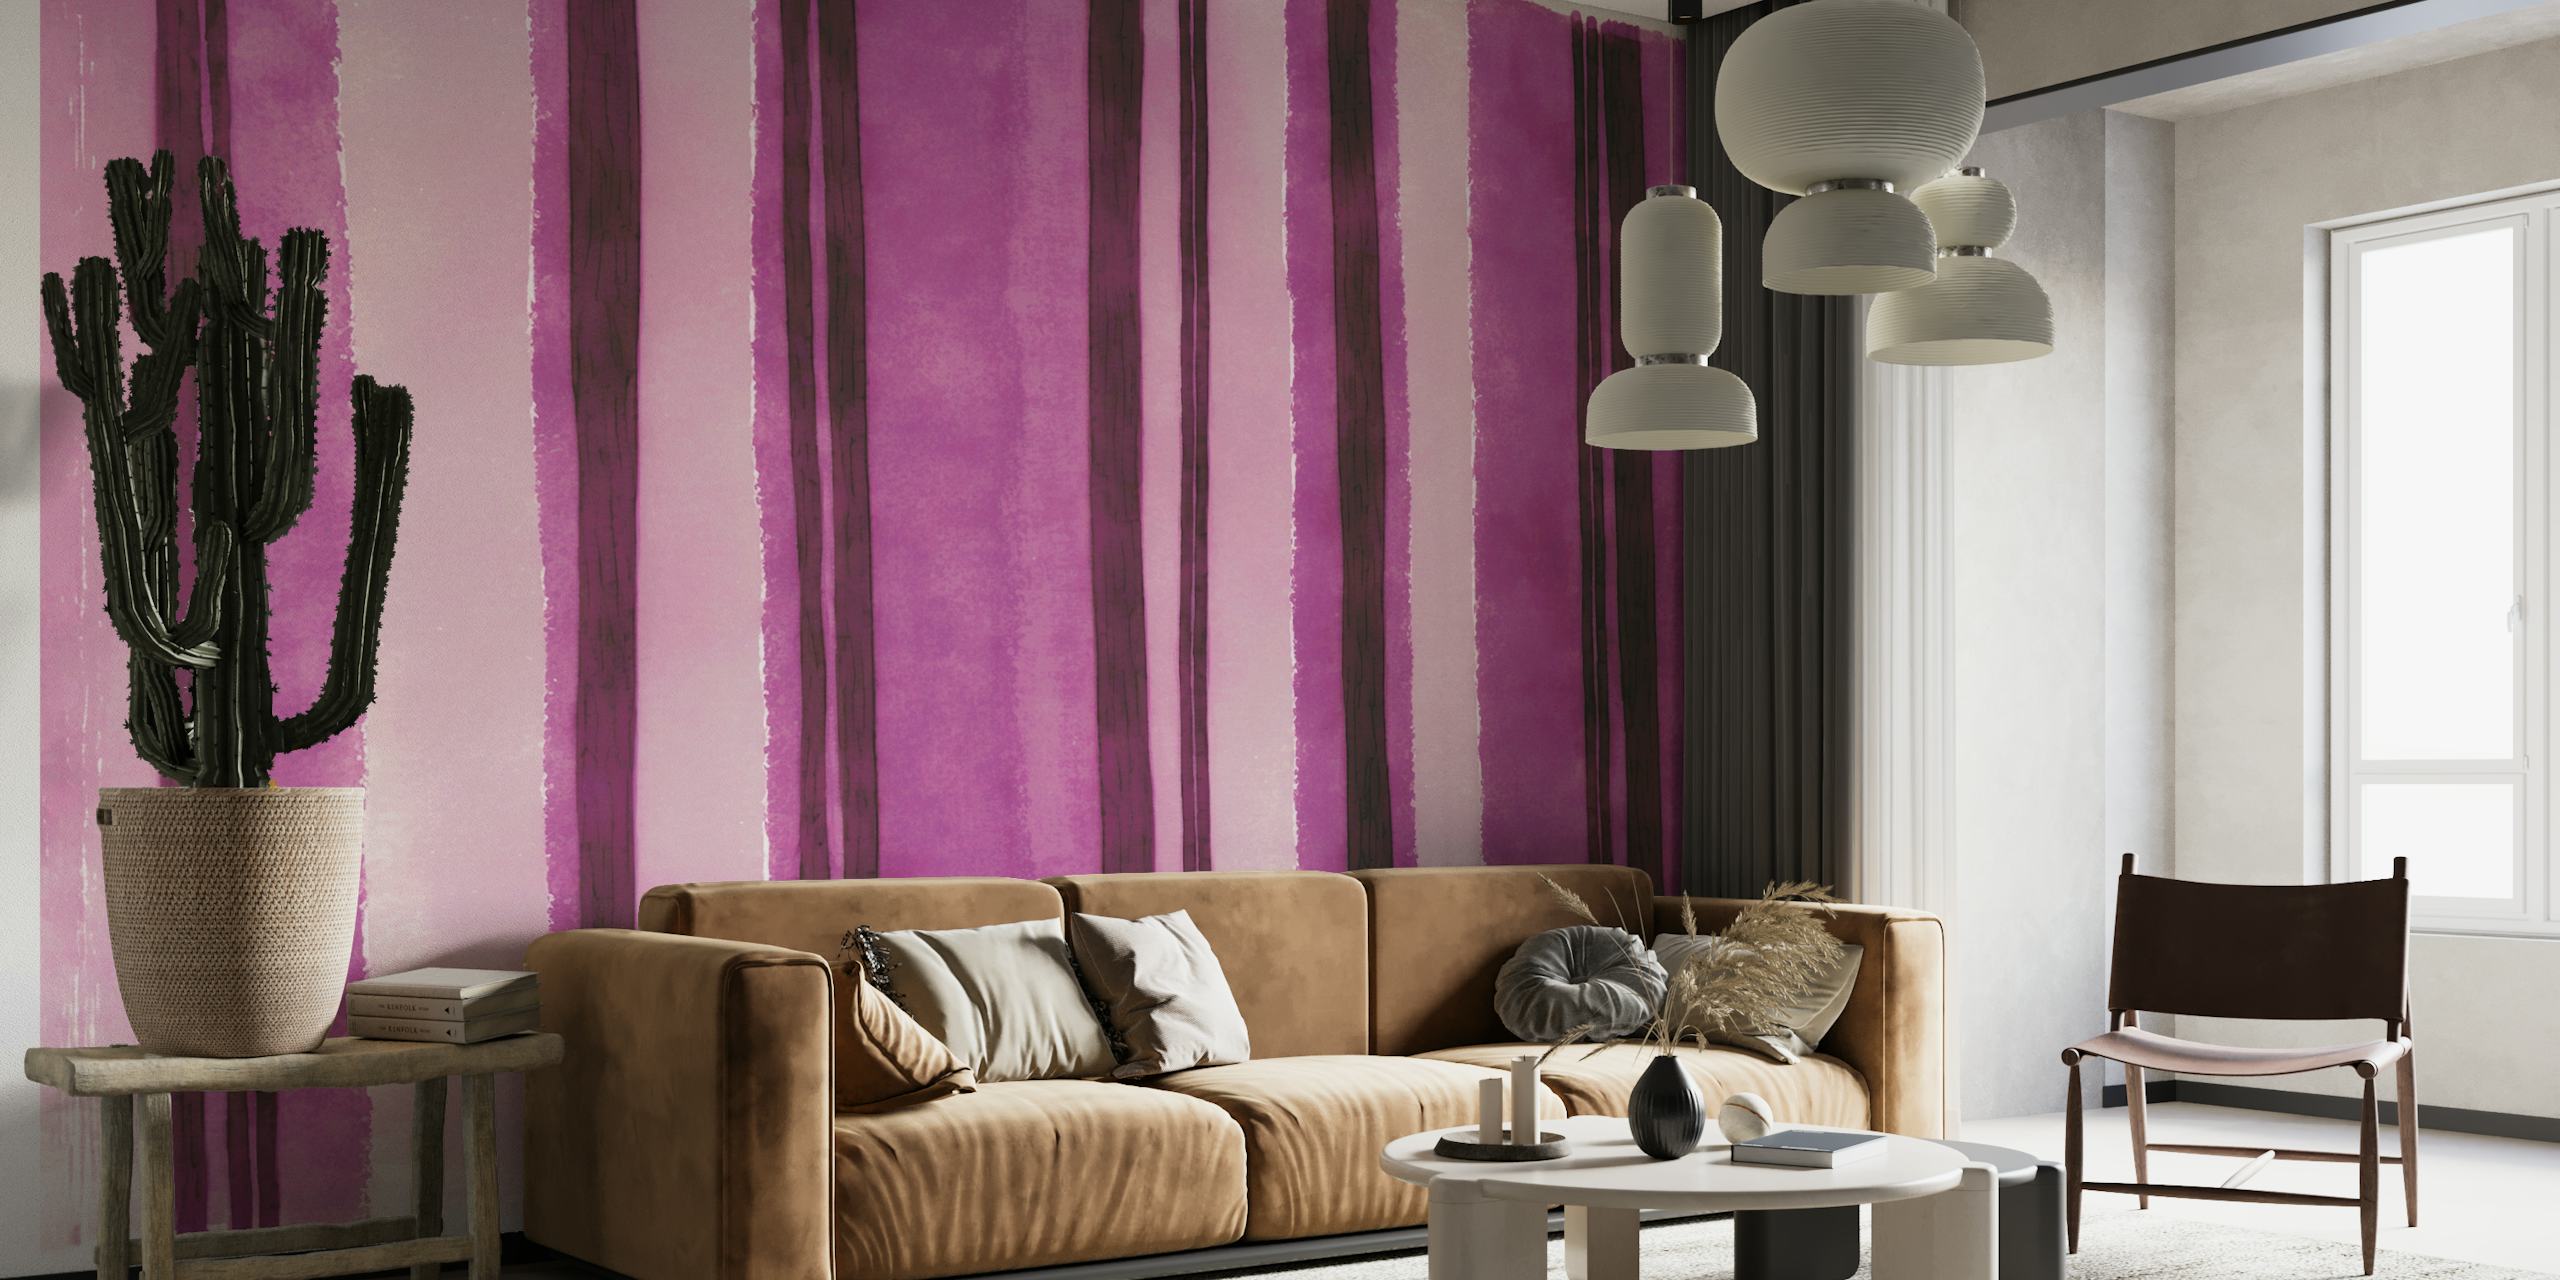 Fuchsia Pink Watercolor Stripe wall mural with bold and soft watercolor textures